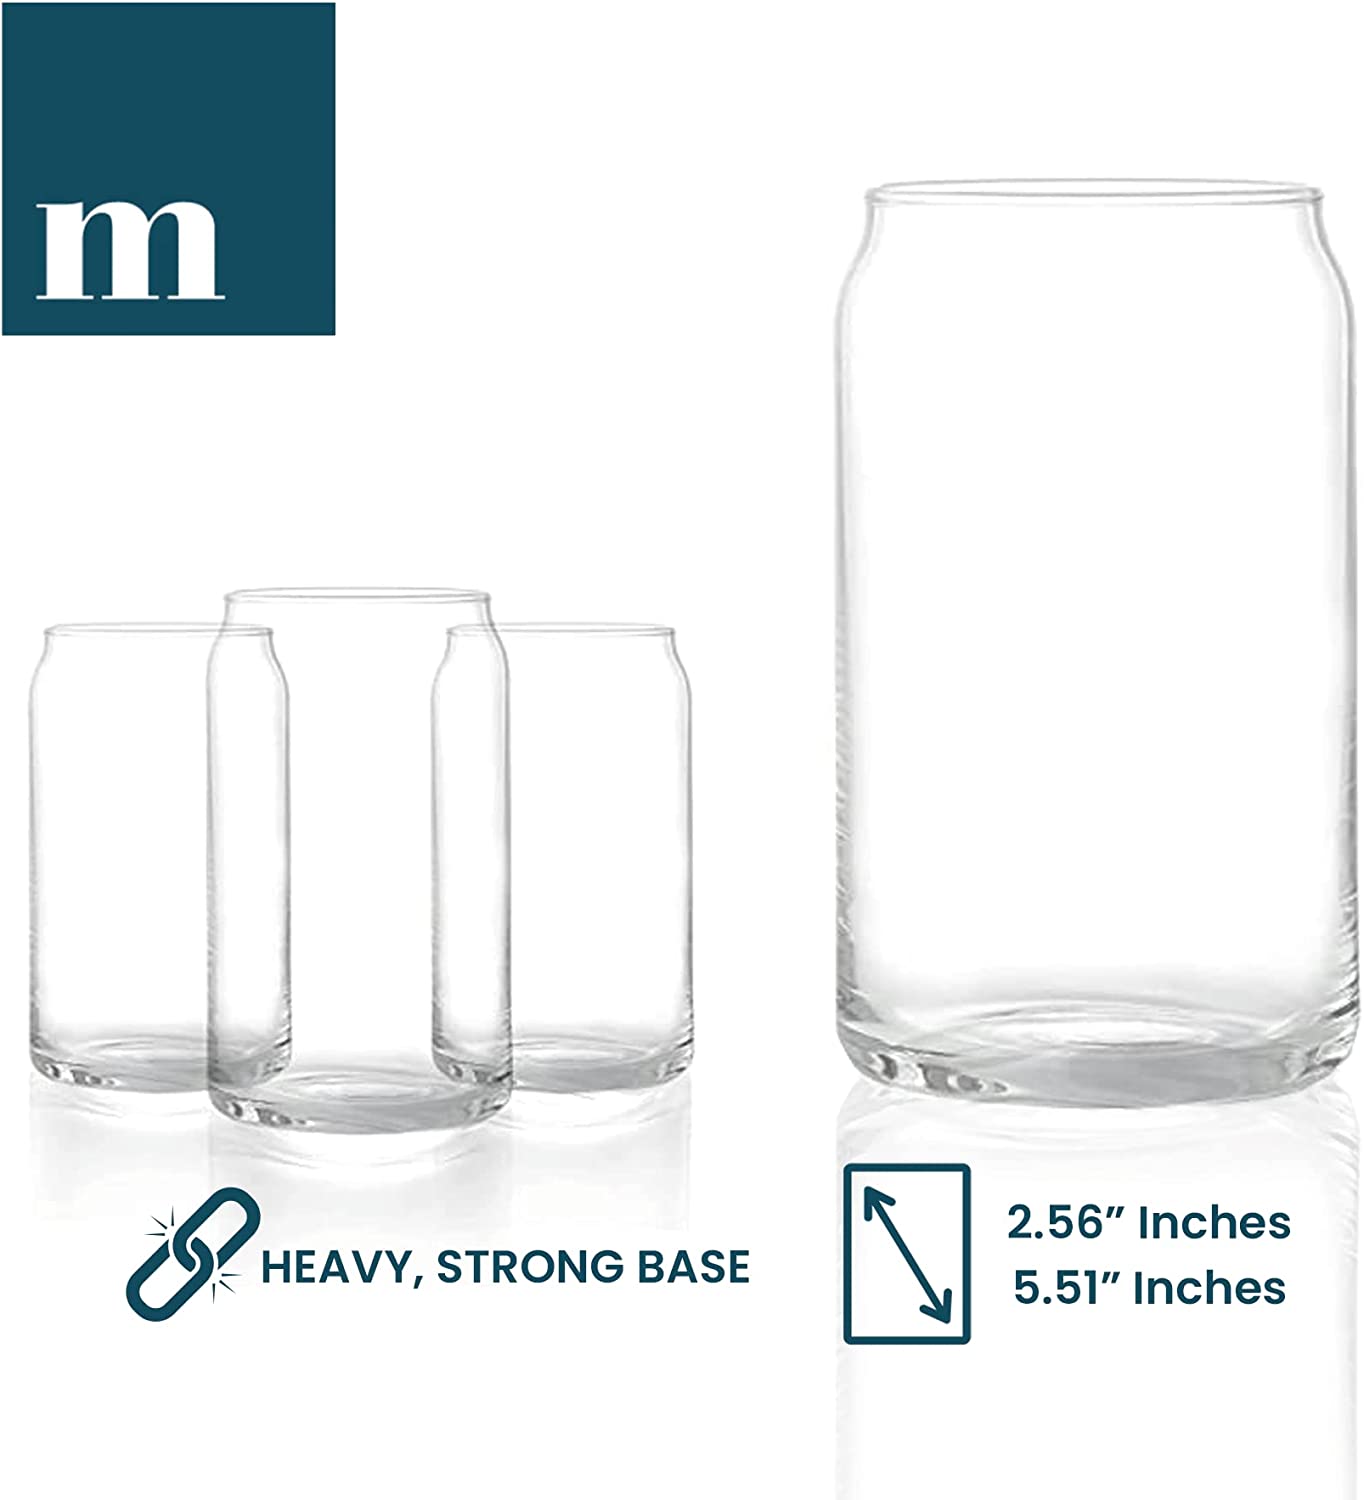 Cold Temperature Change Glass Cup - 4 Pack, 16 oz Can Shaped Glass Cups,  Drinking Glasses, Beer Mug,…See more Cold Temperature Change Glass Cup - 4